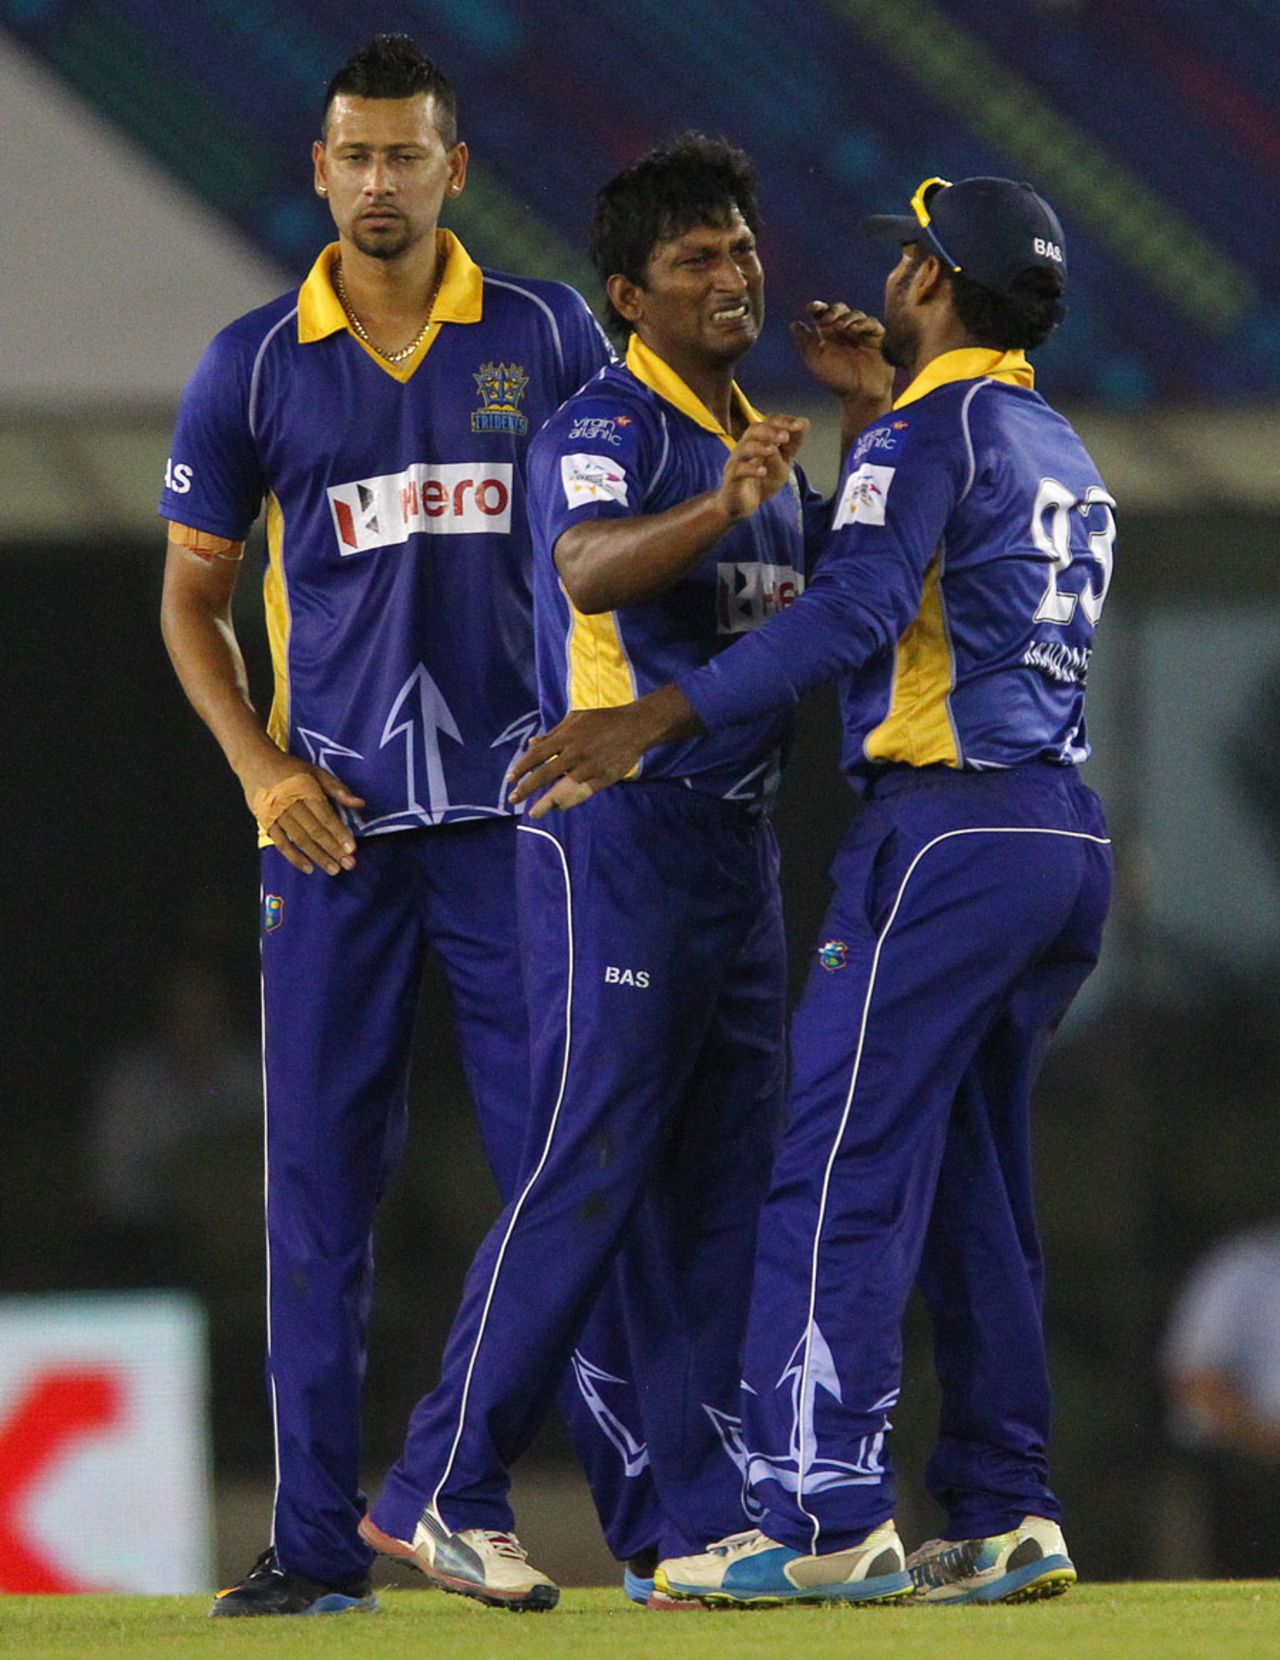 Jeevan Mendis collected 4 for 27 to dent Cobras' chase, Barbados Tridents v Cape Cobras, Champions League T20, Group B, Mohali, September 26, 2014